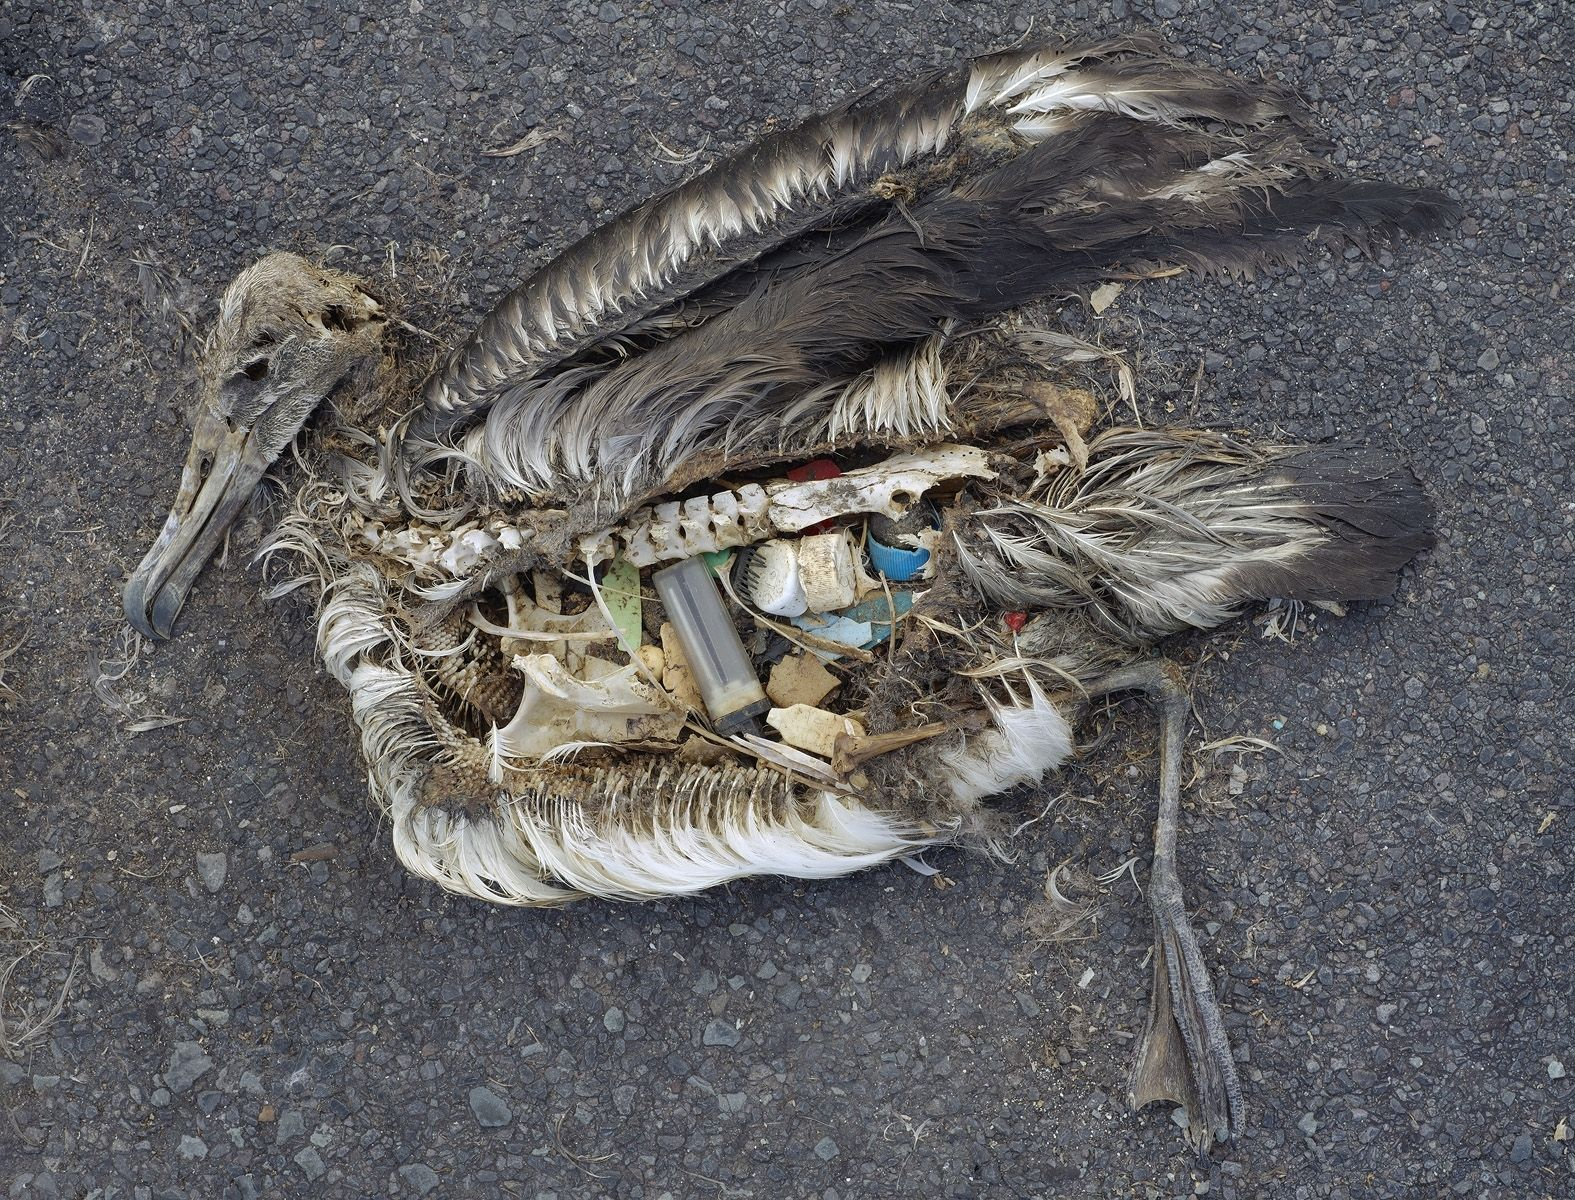 A dead albatross chick whose stomach is full of plastic garbage.